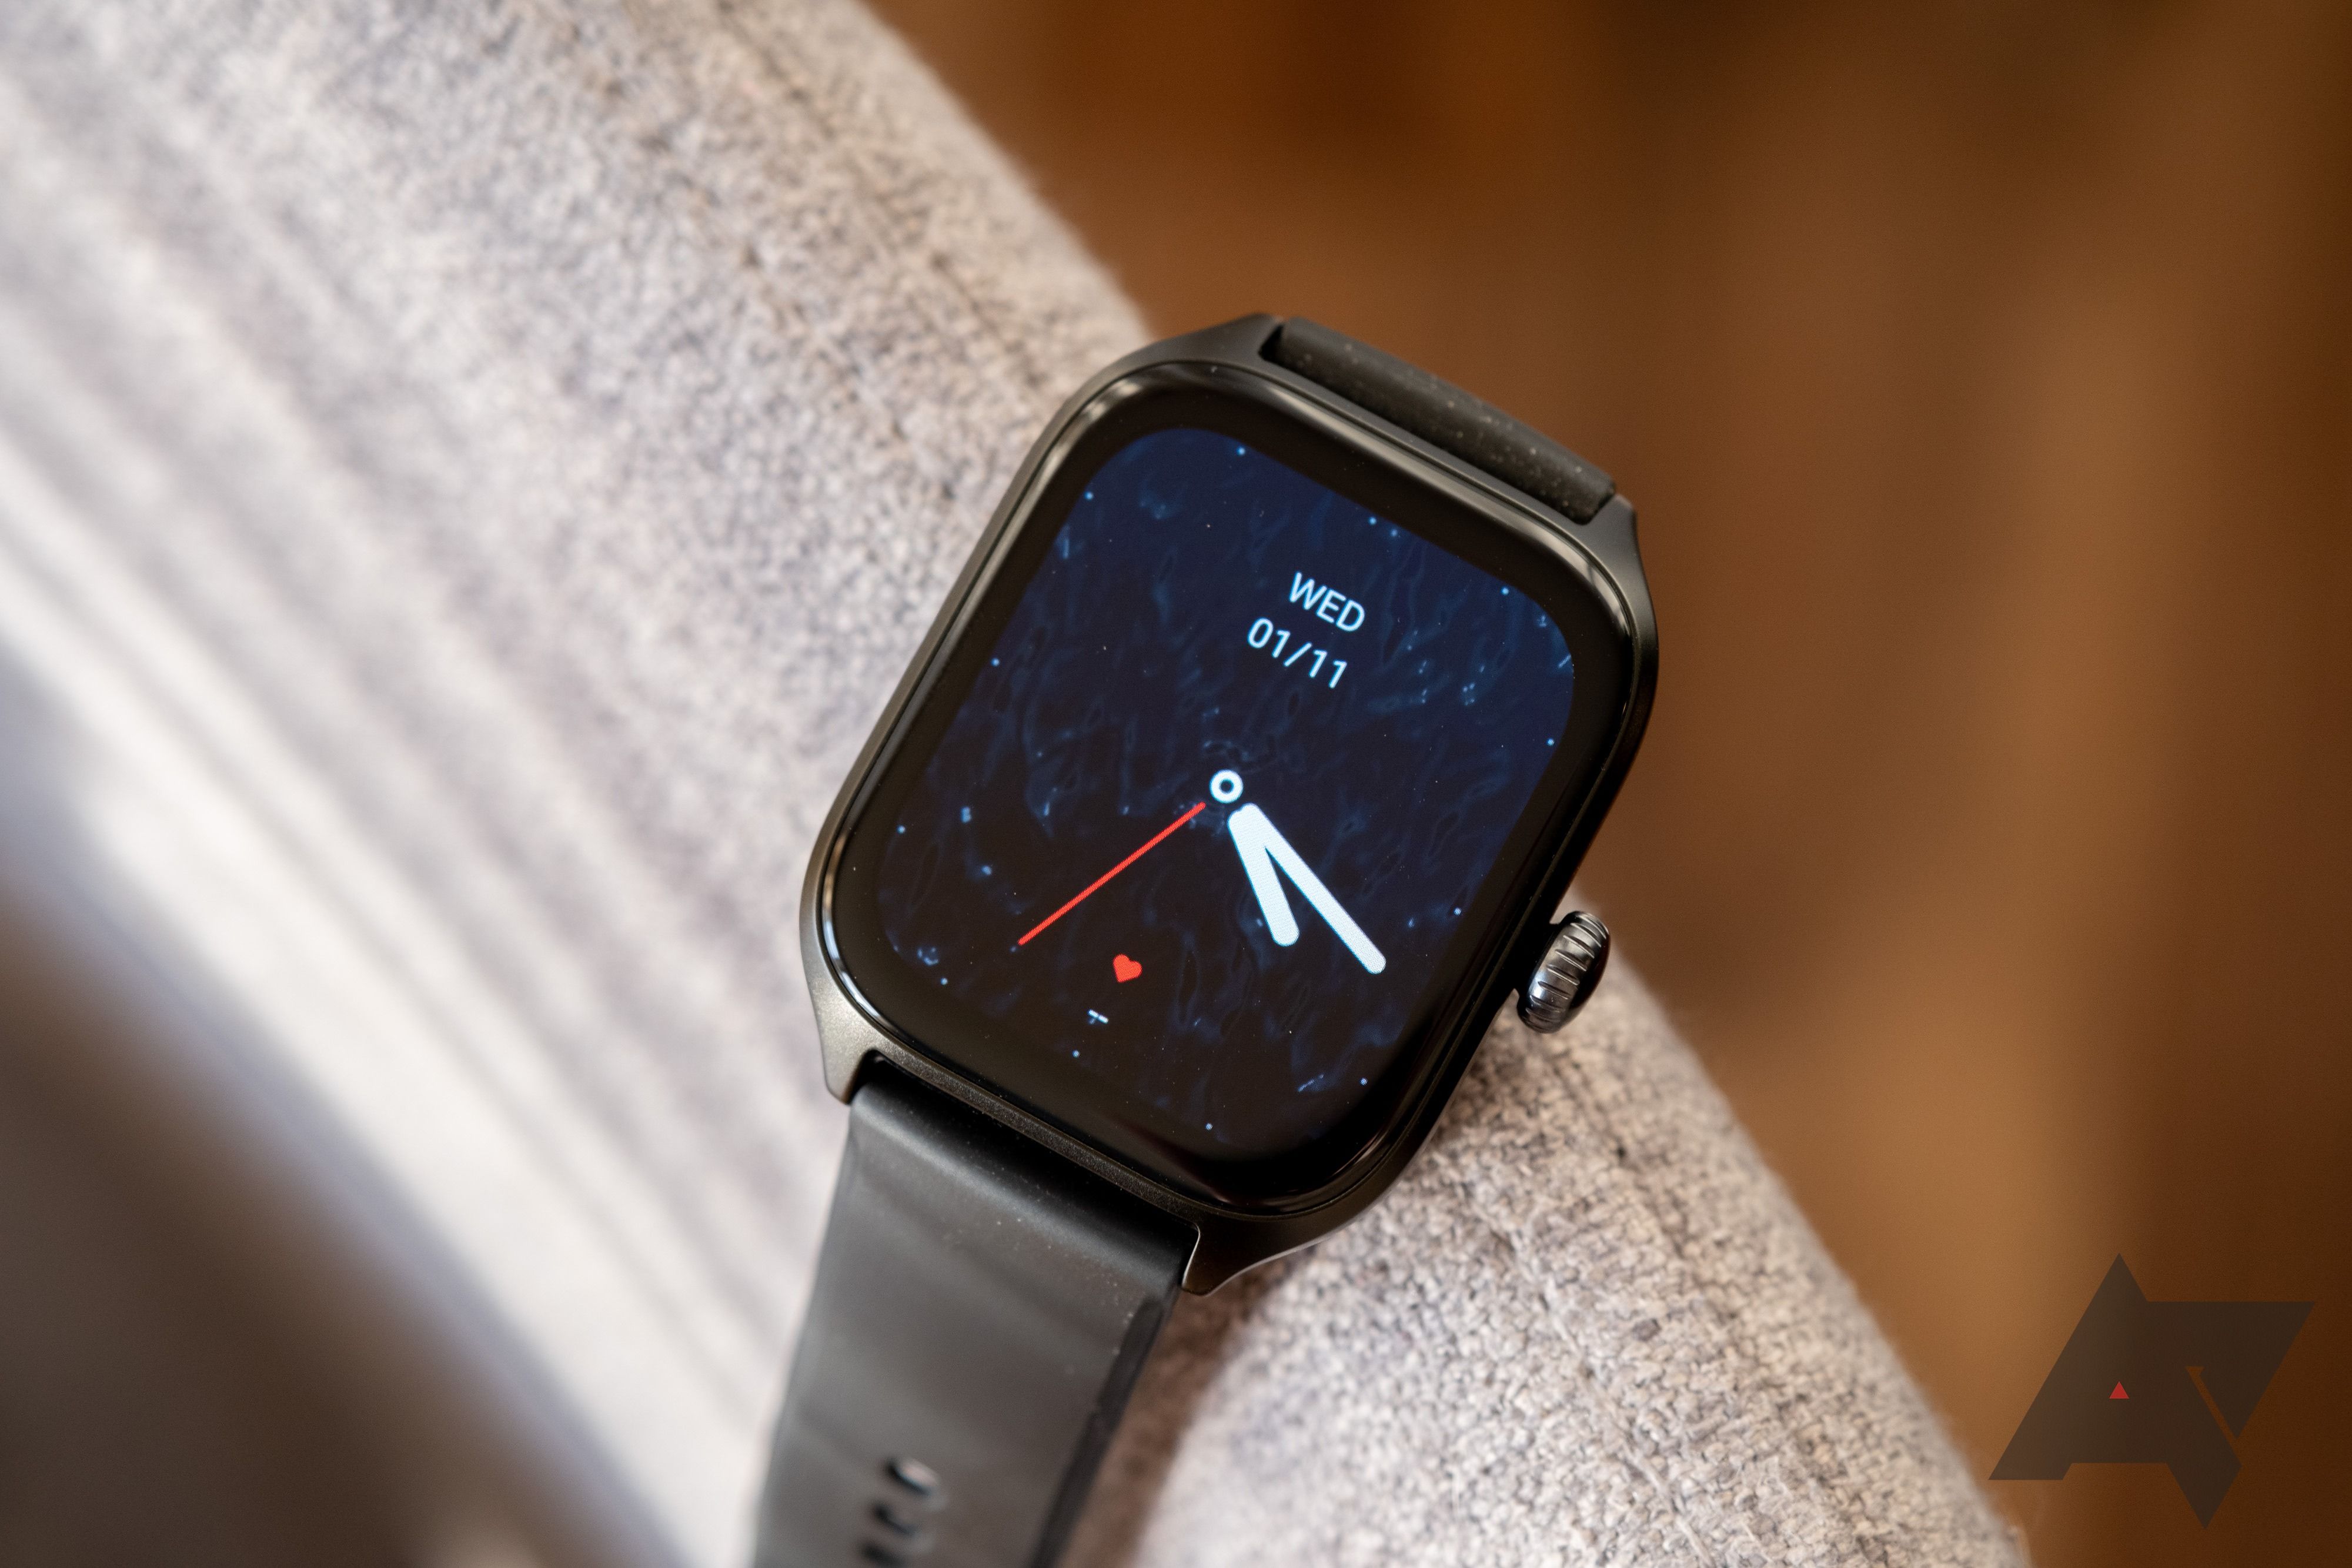 Review - Amazfit GTS 4 Mini - Little package carrying big duties